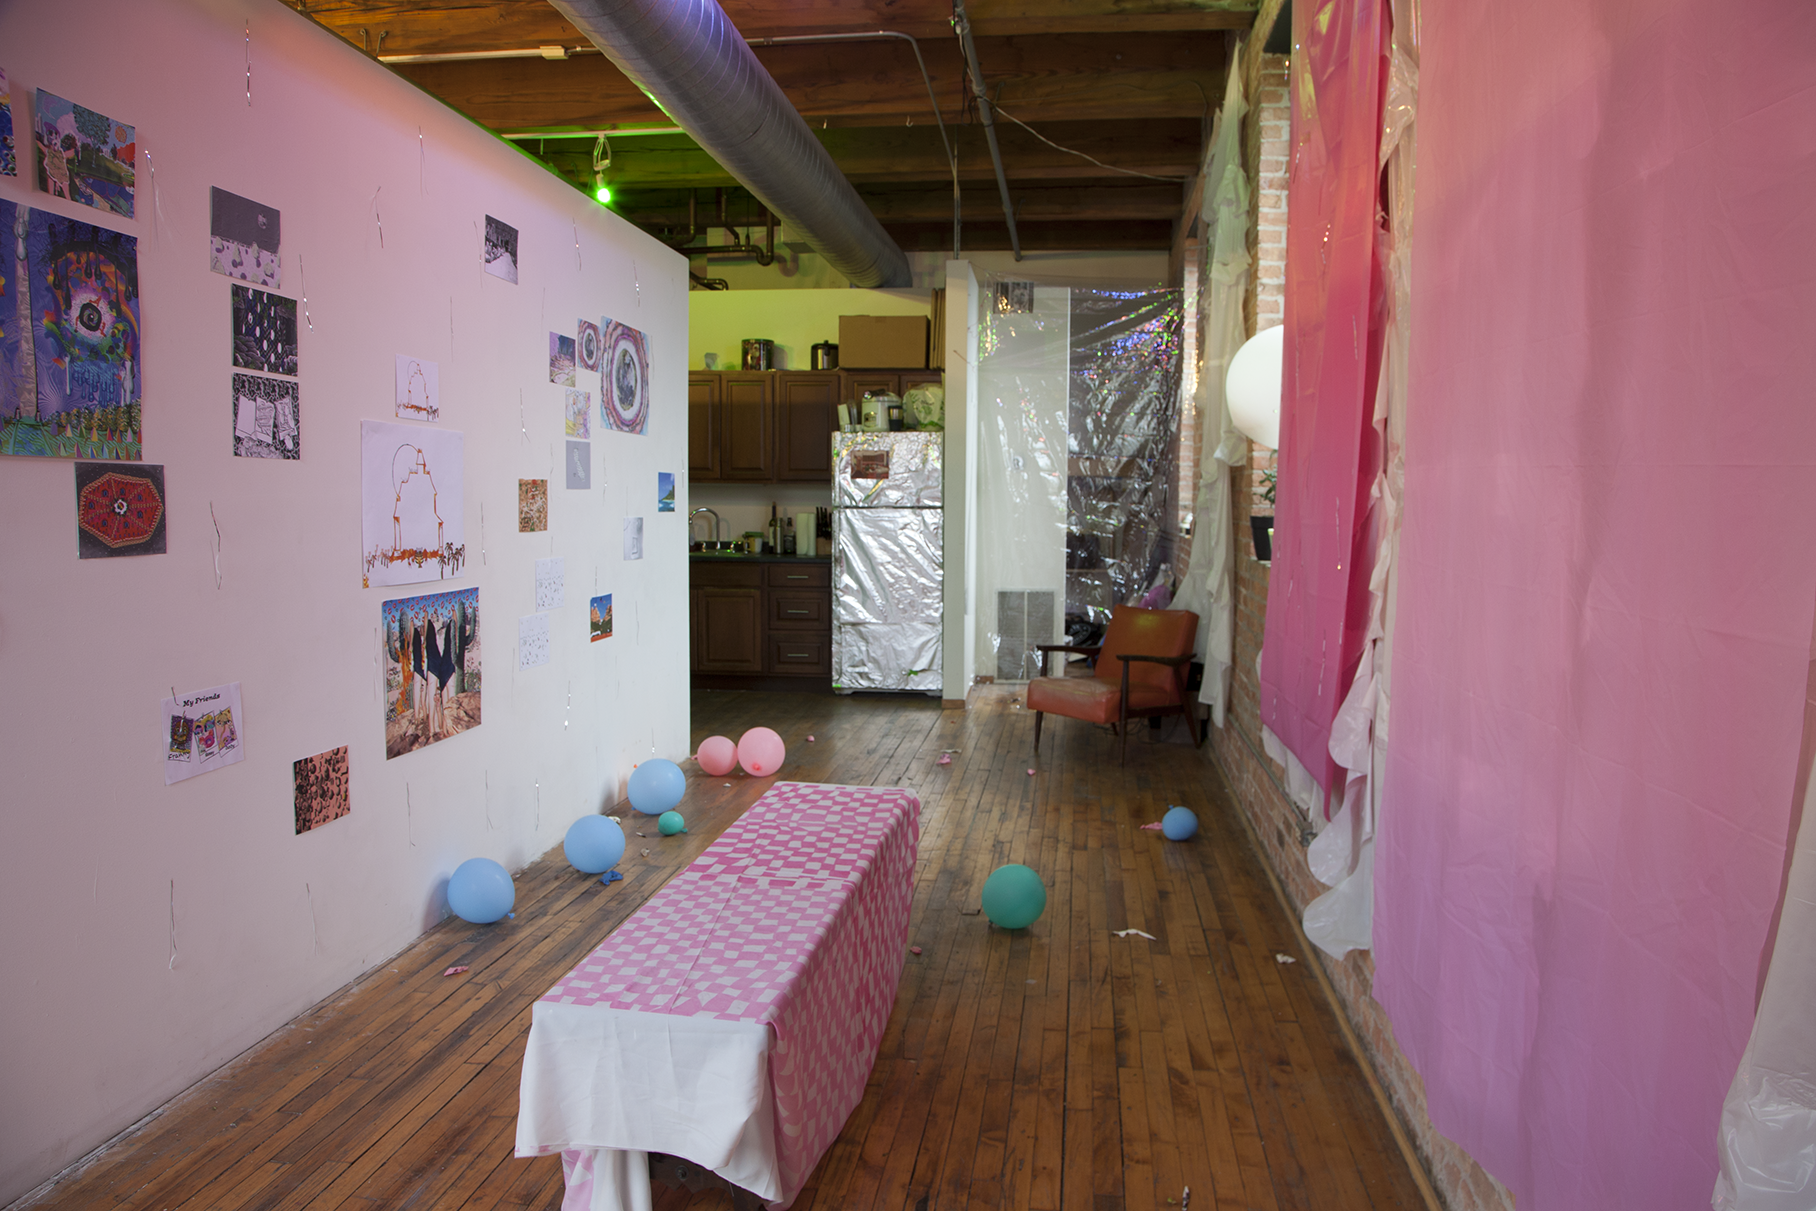 Installation view of many small scale prints hung on white walls on the left and many pink curtains and baloons on the right